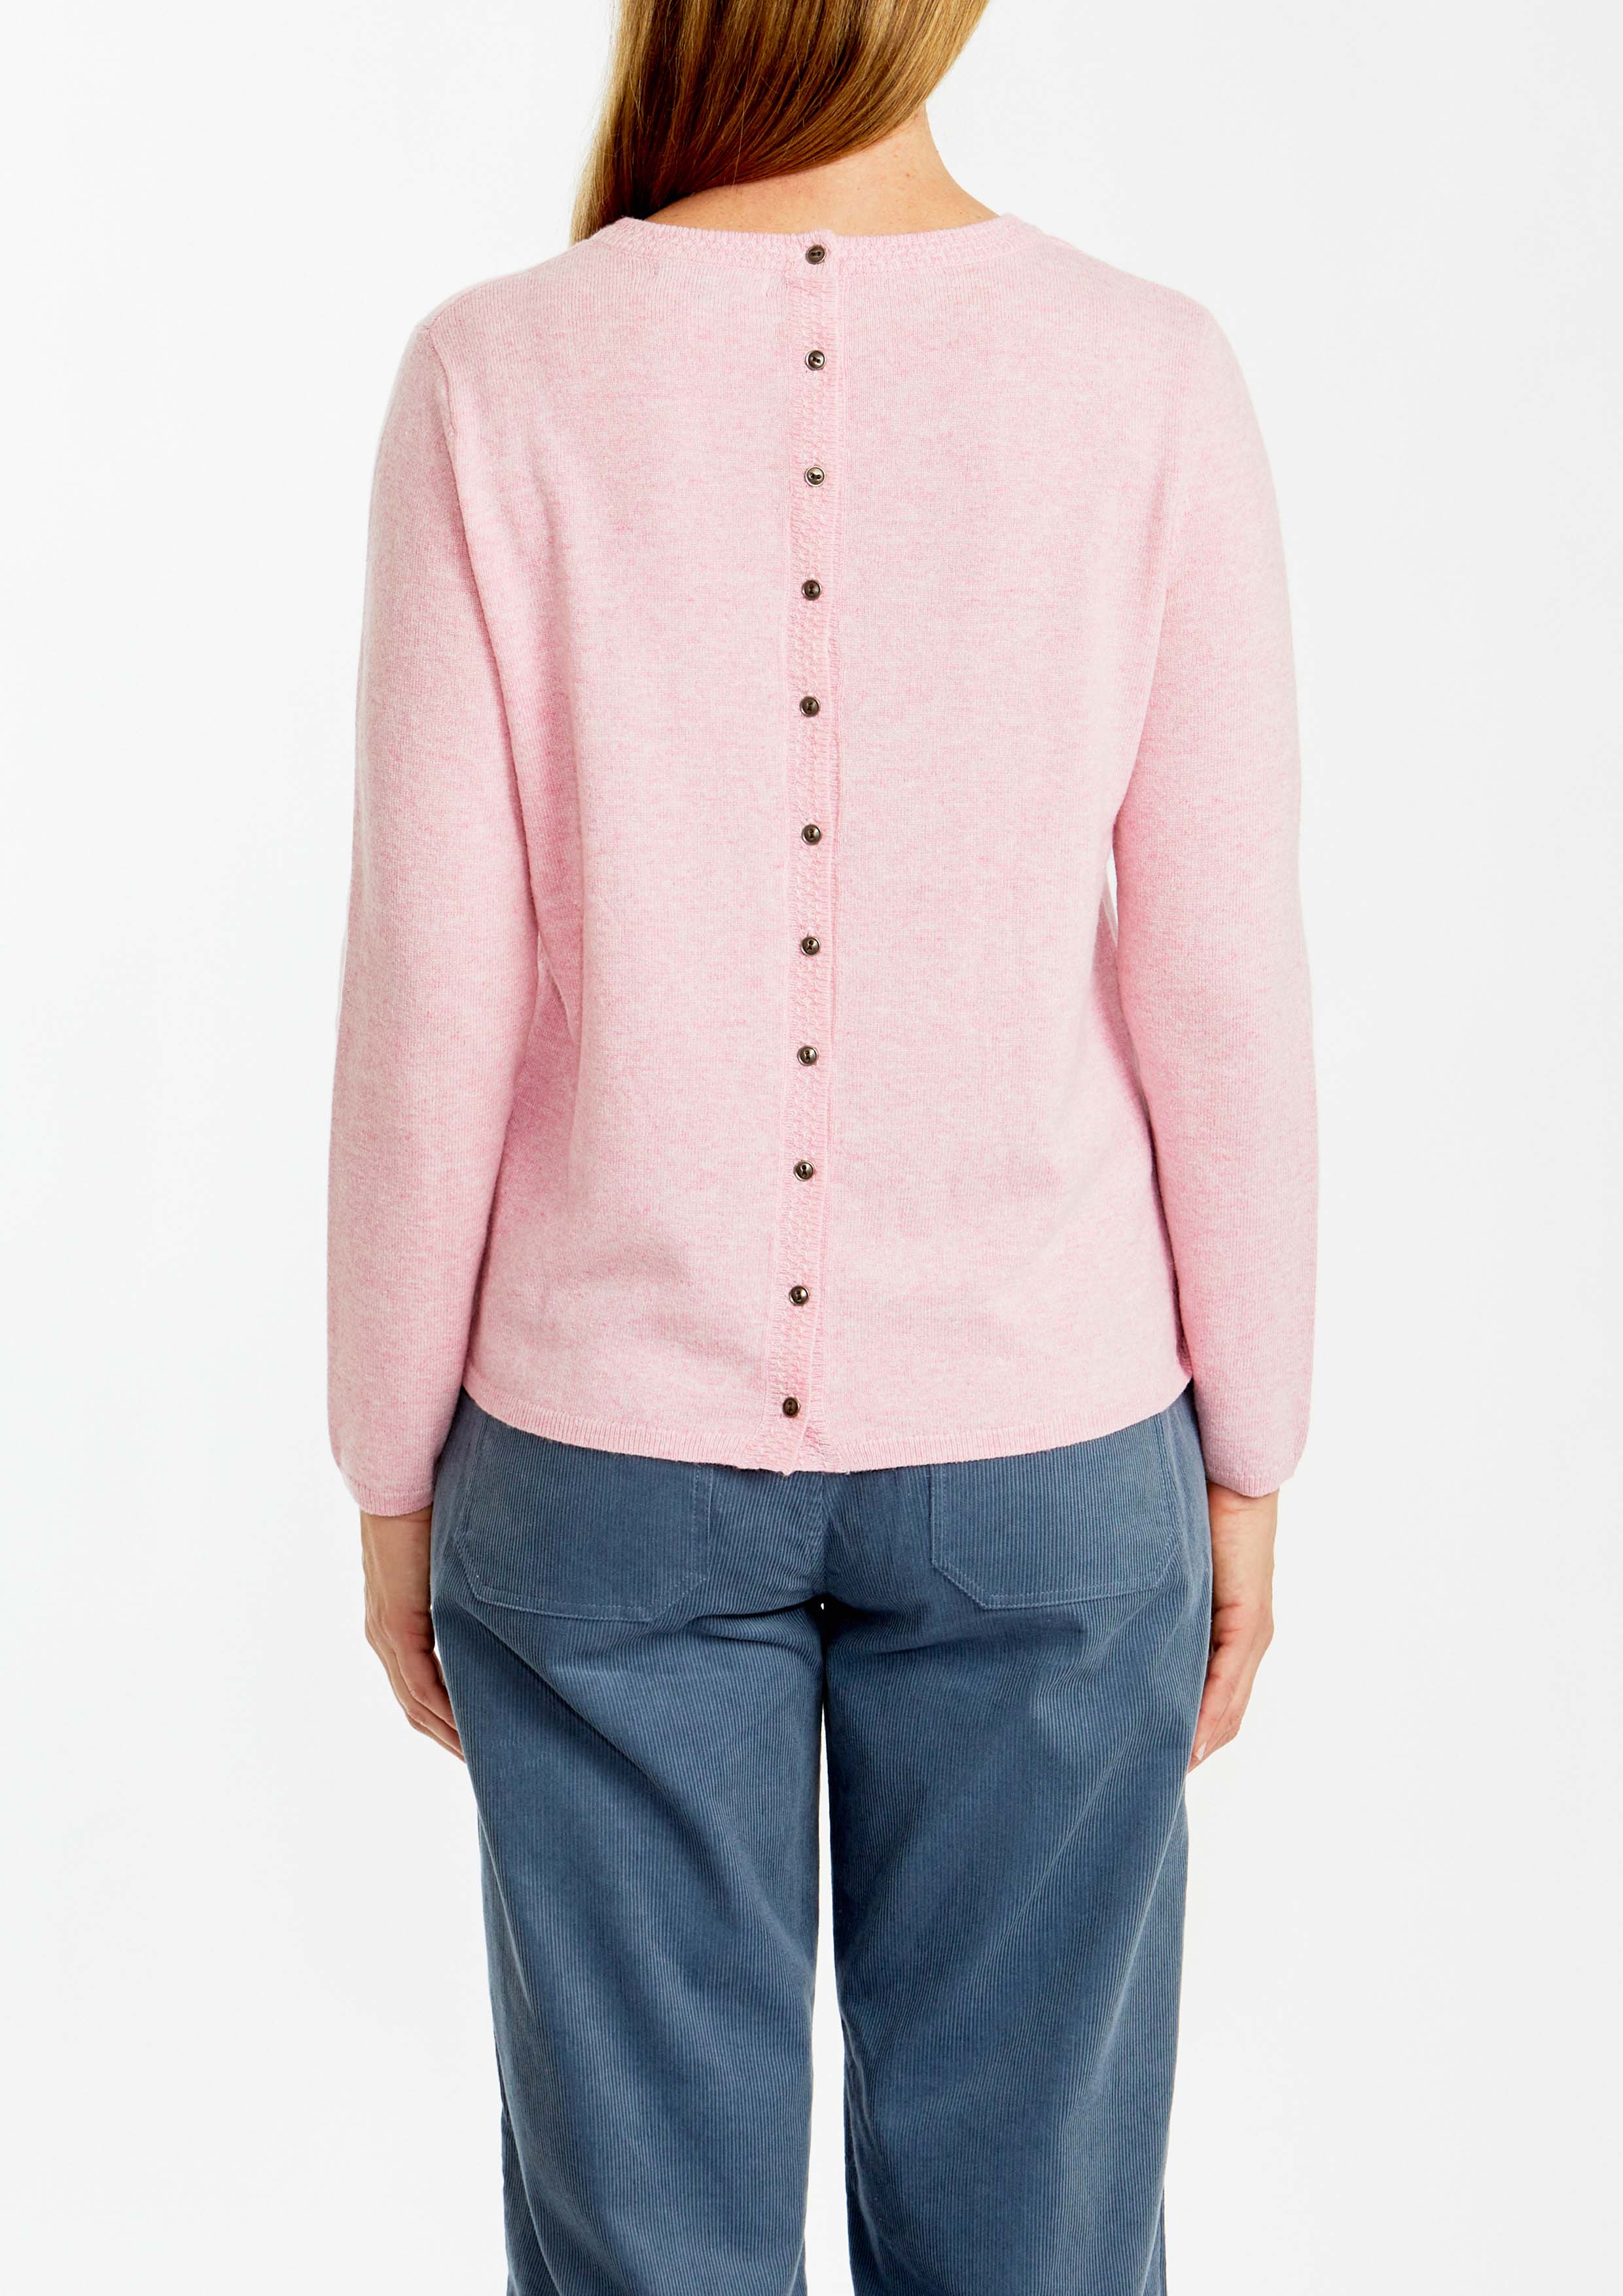 Ping Pong Button Back Pullover - Fairy Floss Marle